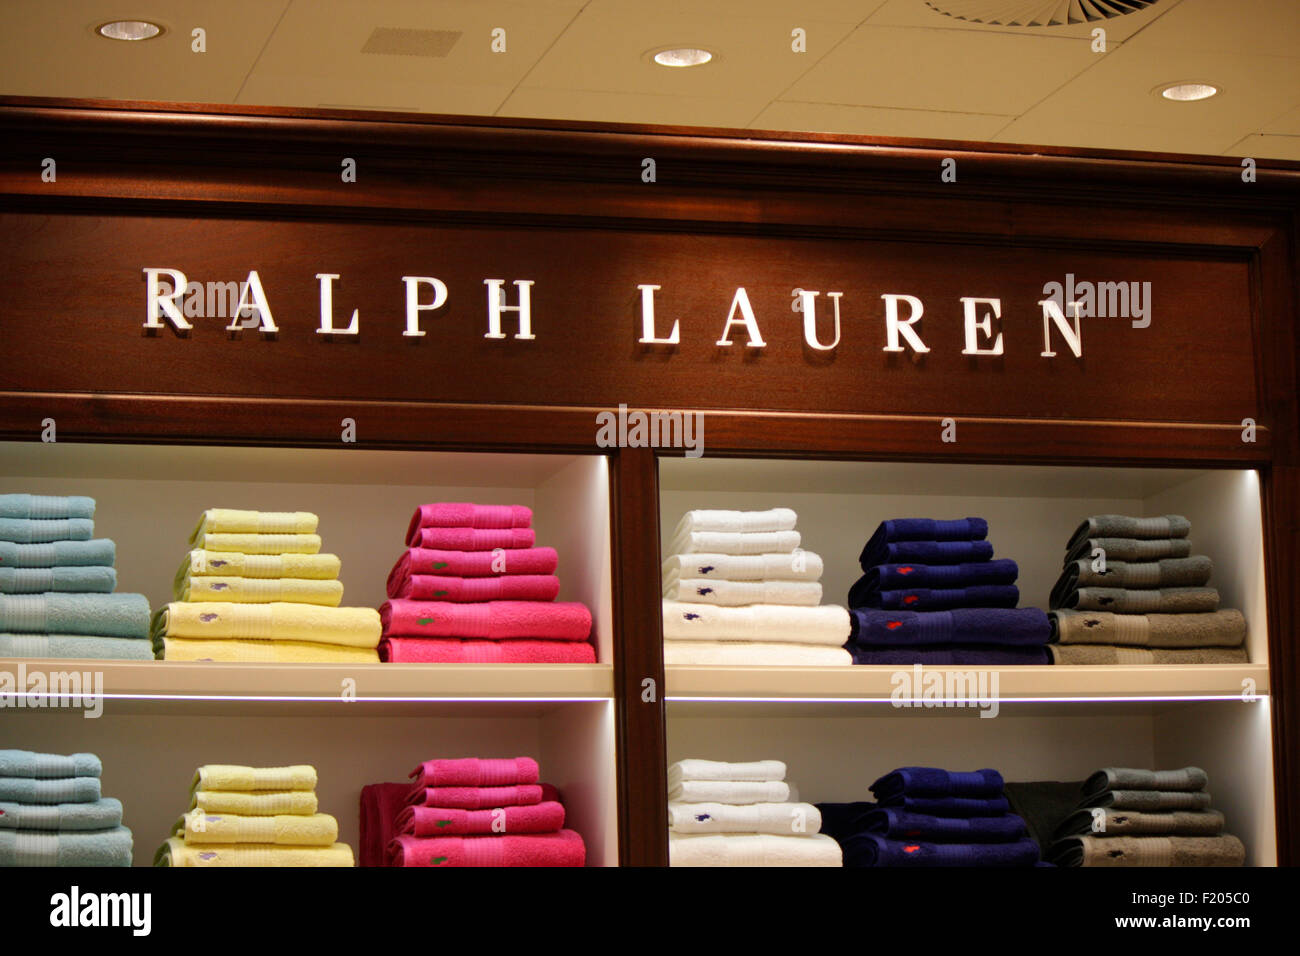 Symbol Of Polo Ralph Lauren - The Flagship Brand Of The Company Stock  Photo, Picture and Royalty Free Image. Image 15985971.